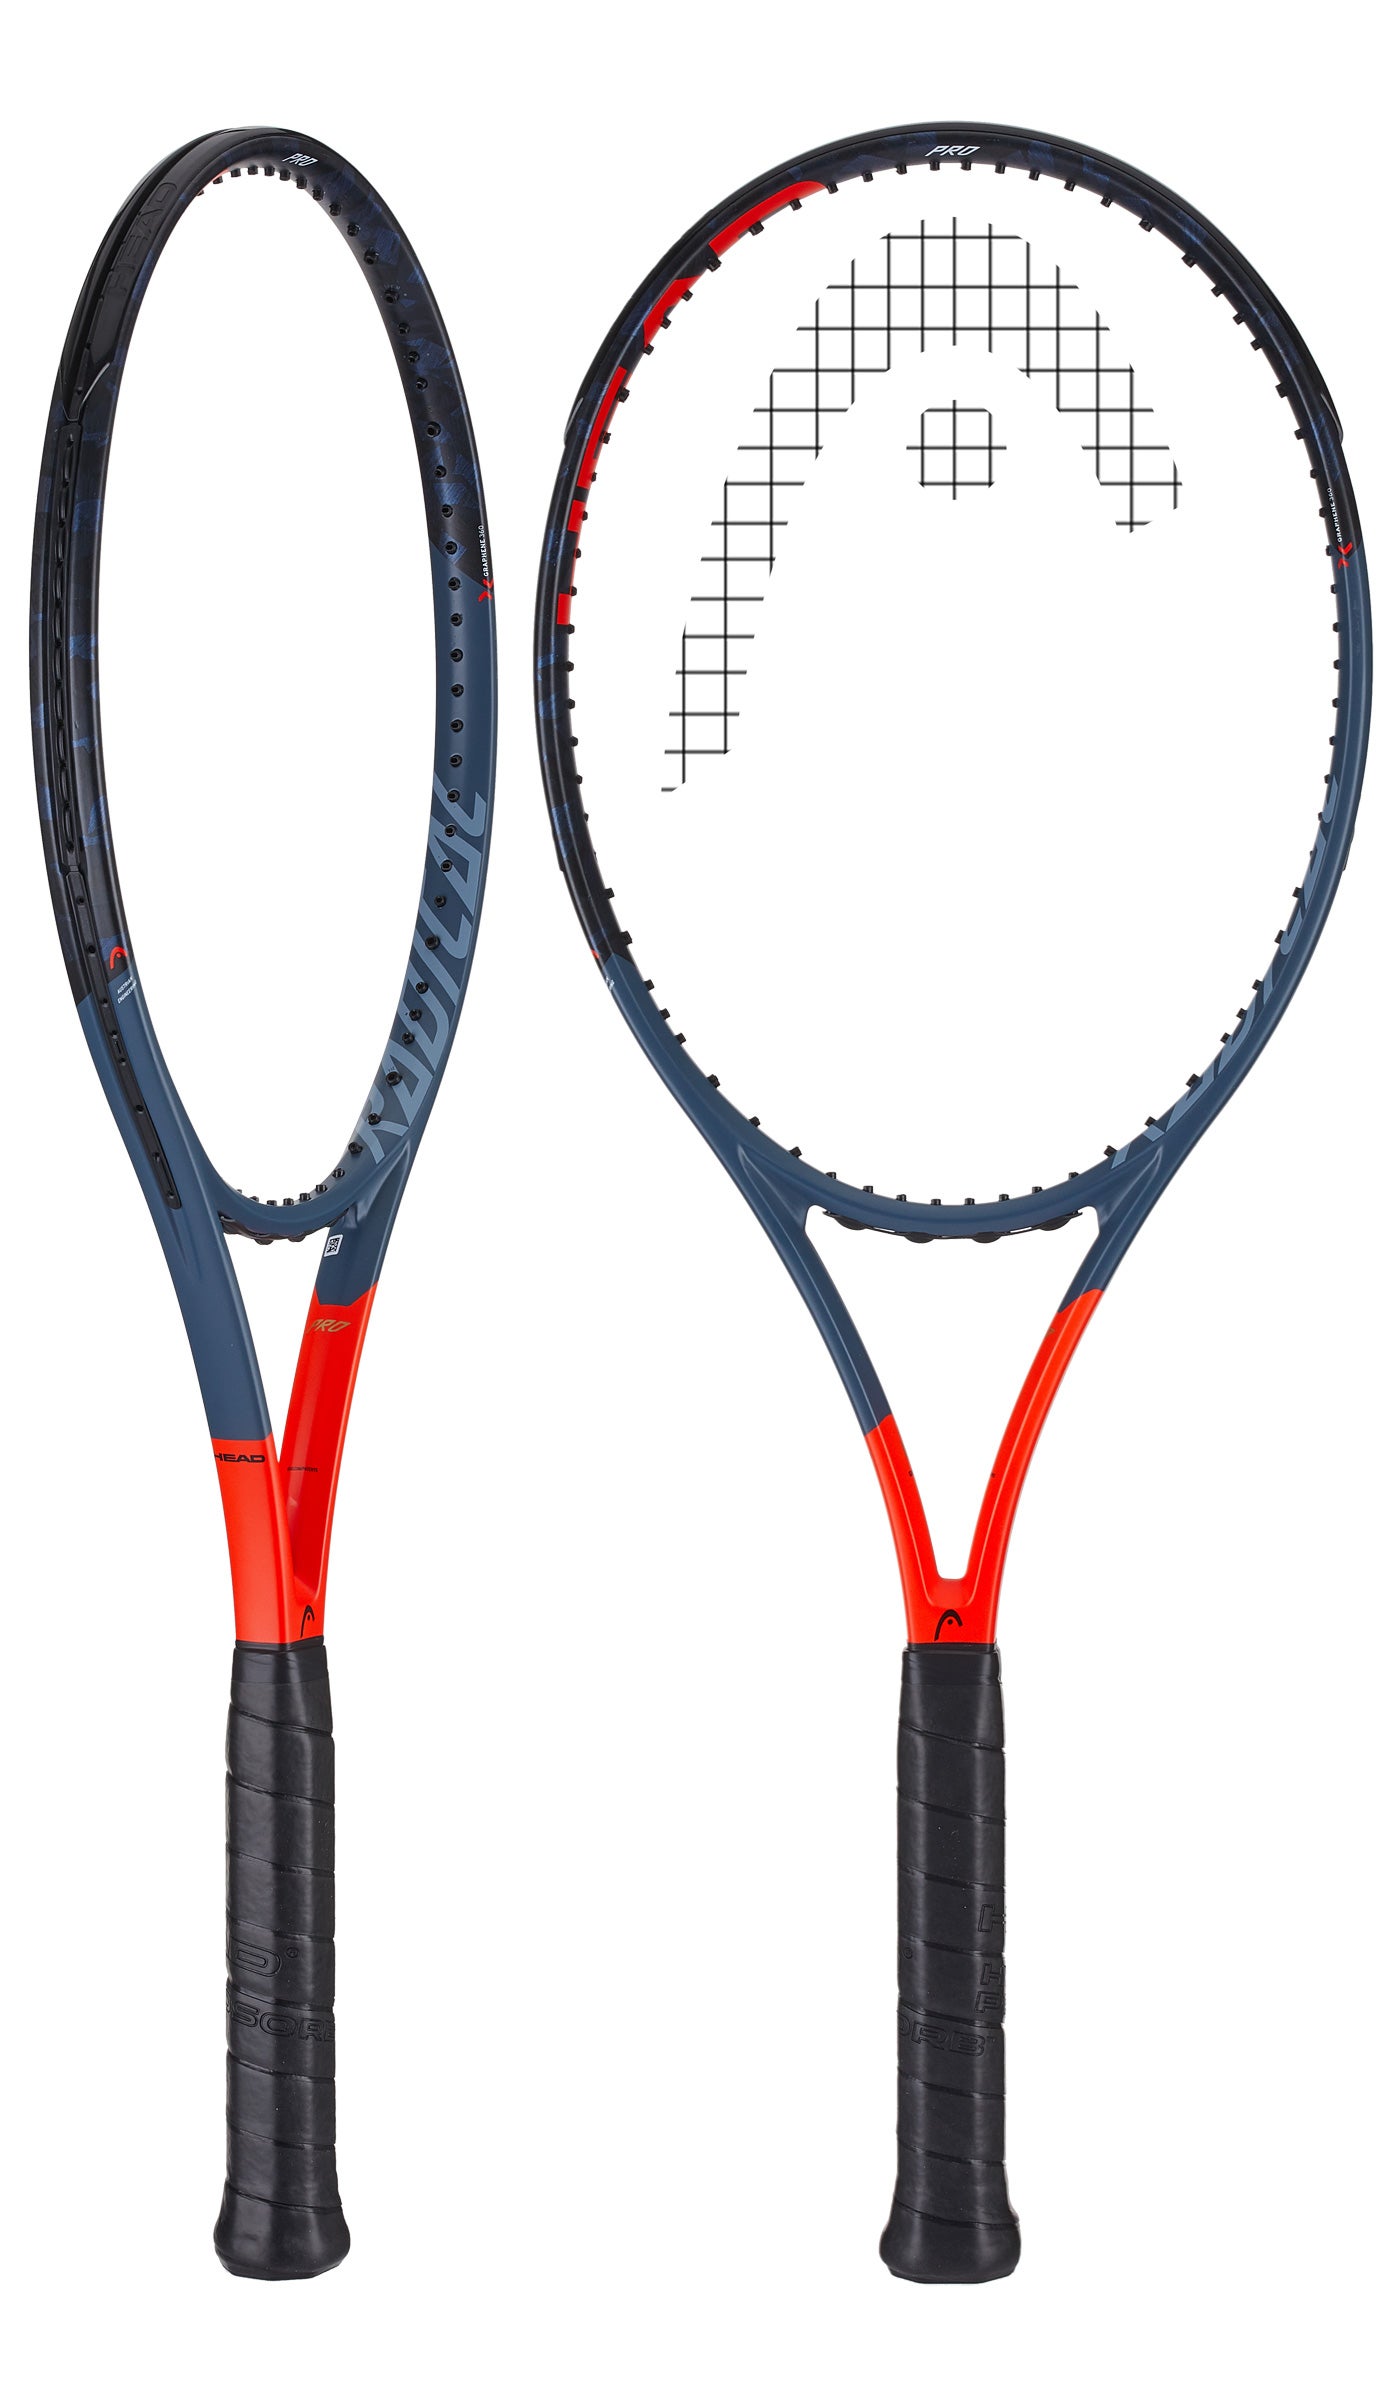 Radical Pro Tennis Racquet Racket Free Strings Stringing Details about   Head Graphene 360 